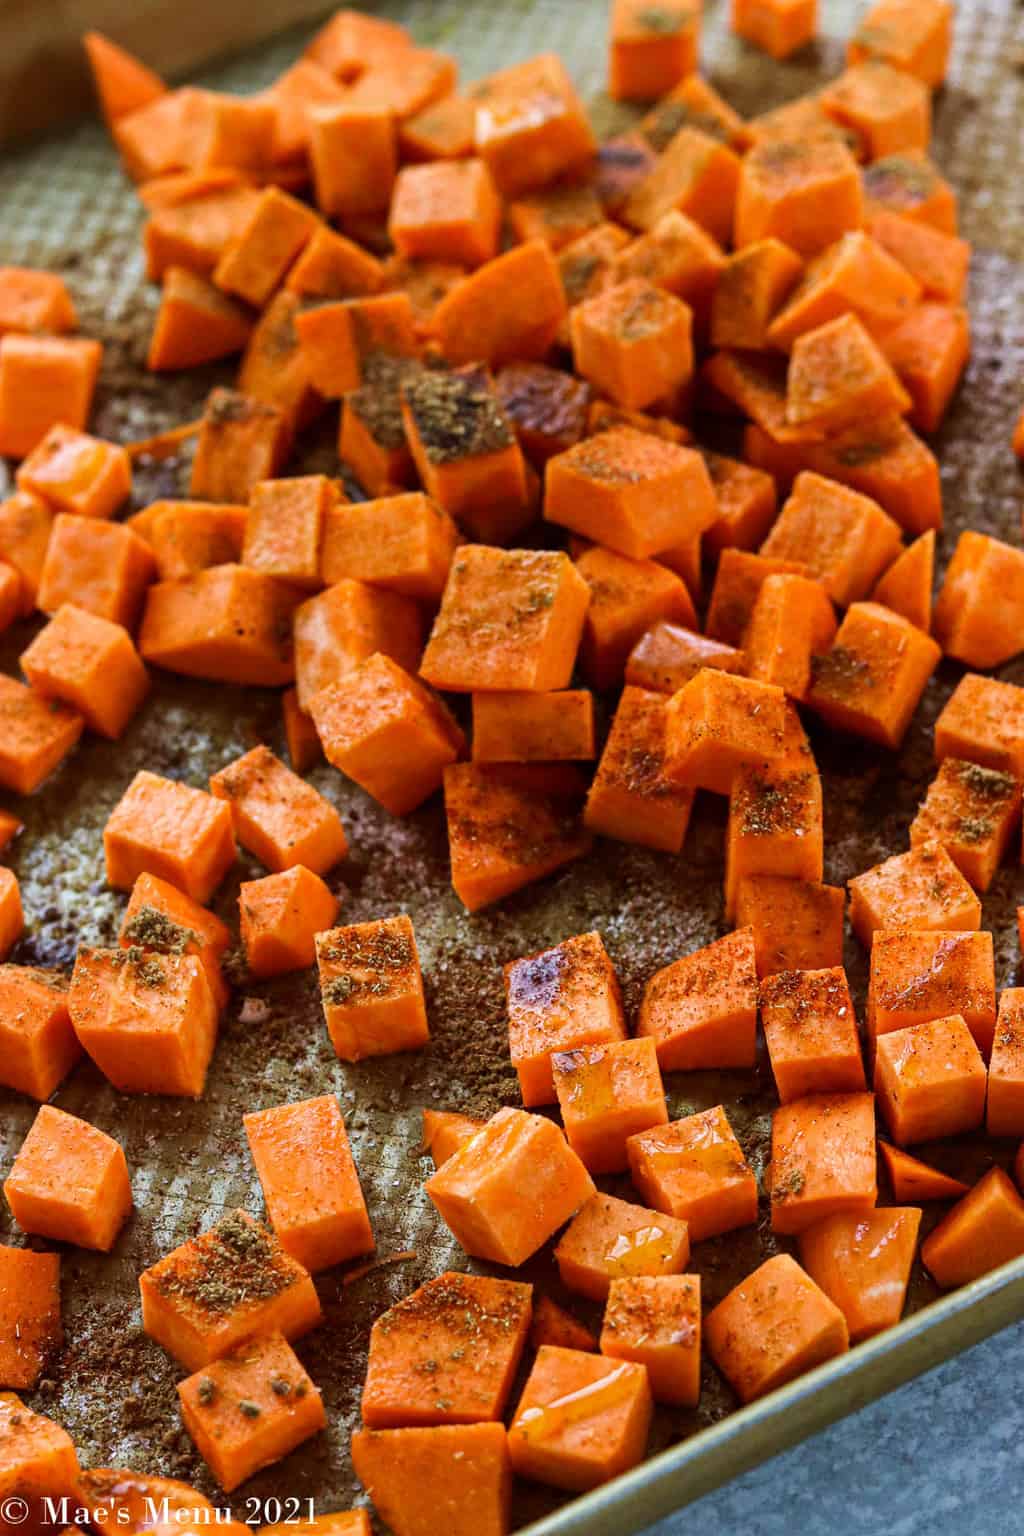 A baking sheet of sweet potatoes drizzled with olive oil and spices